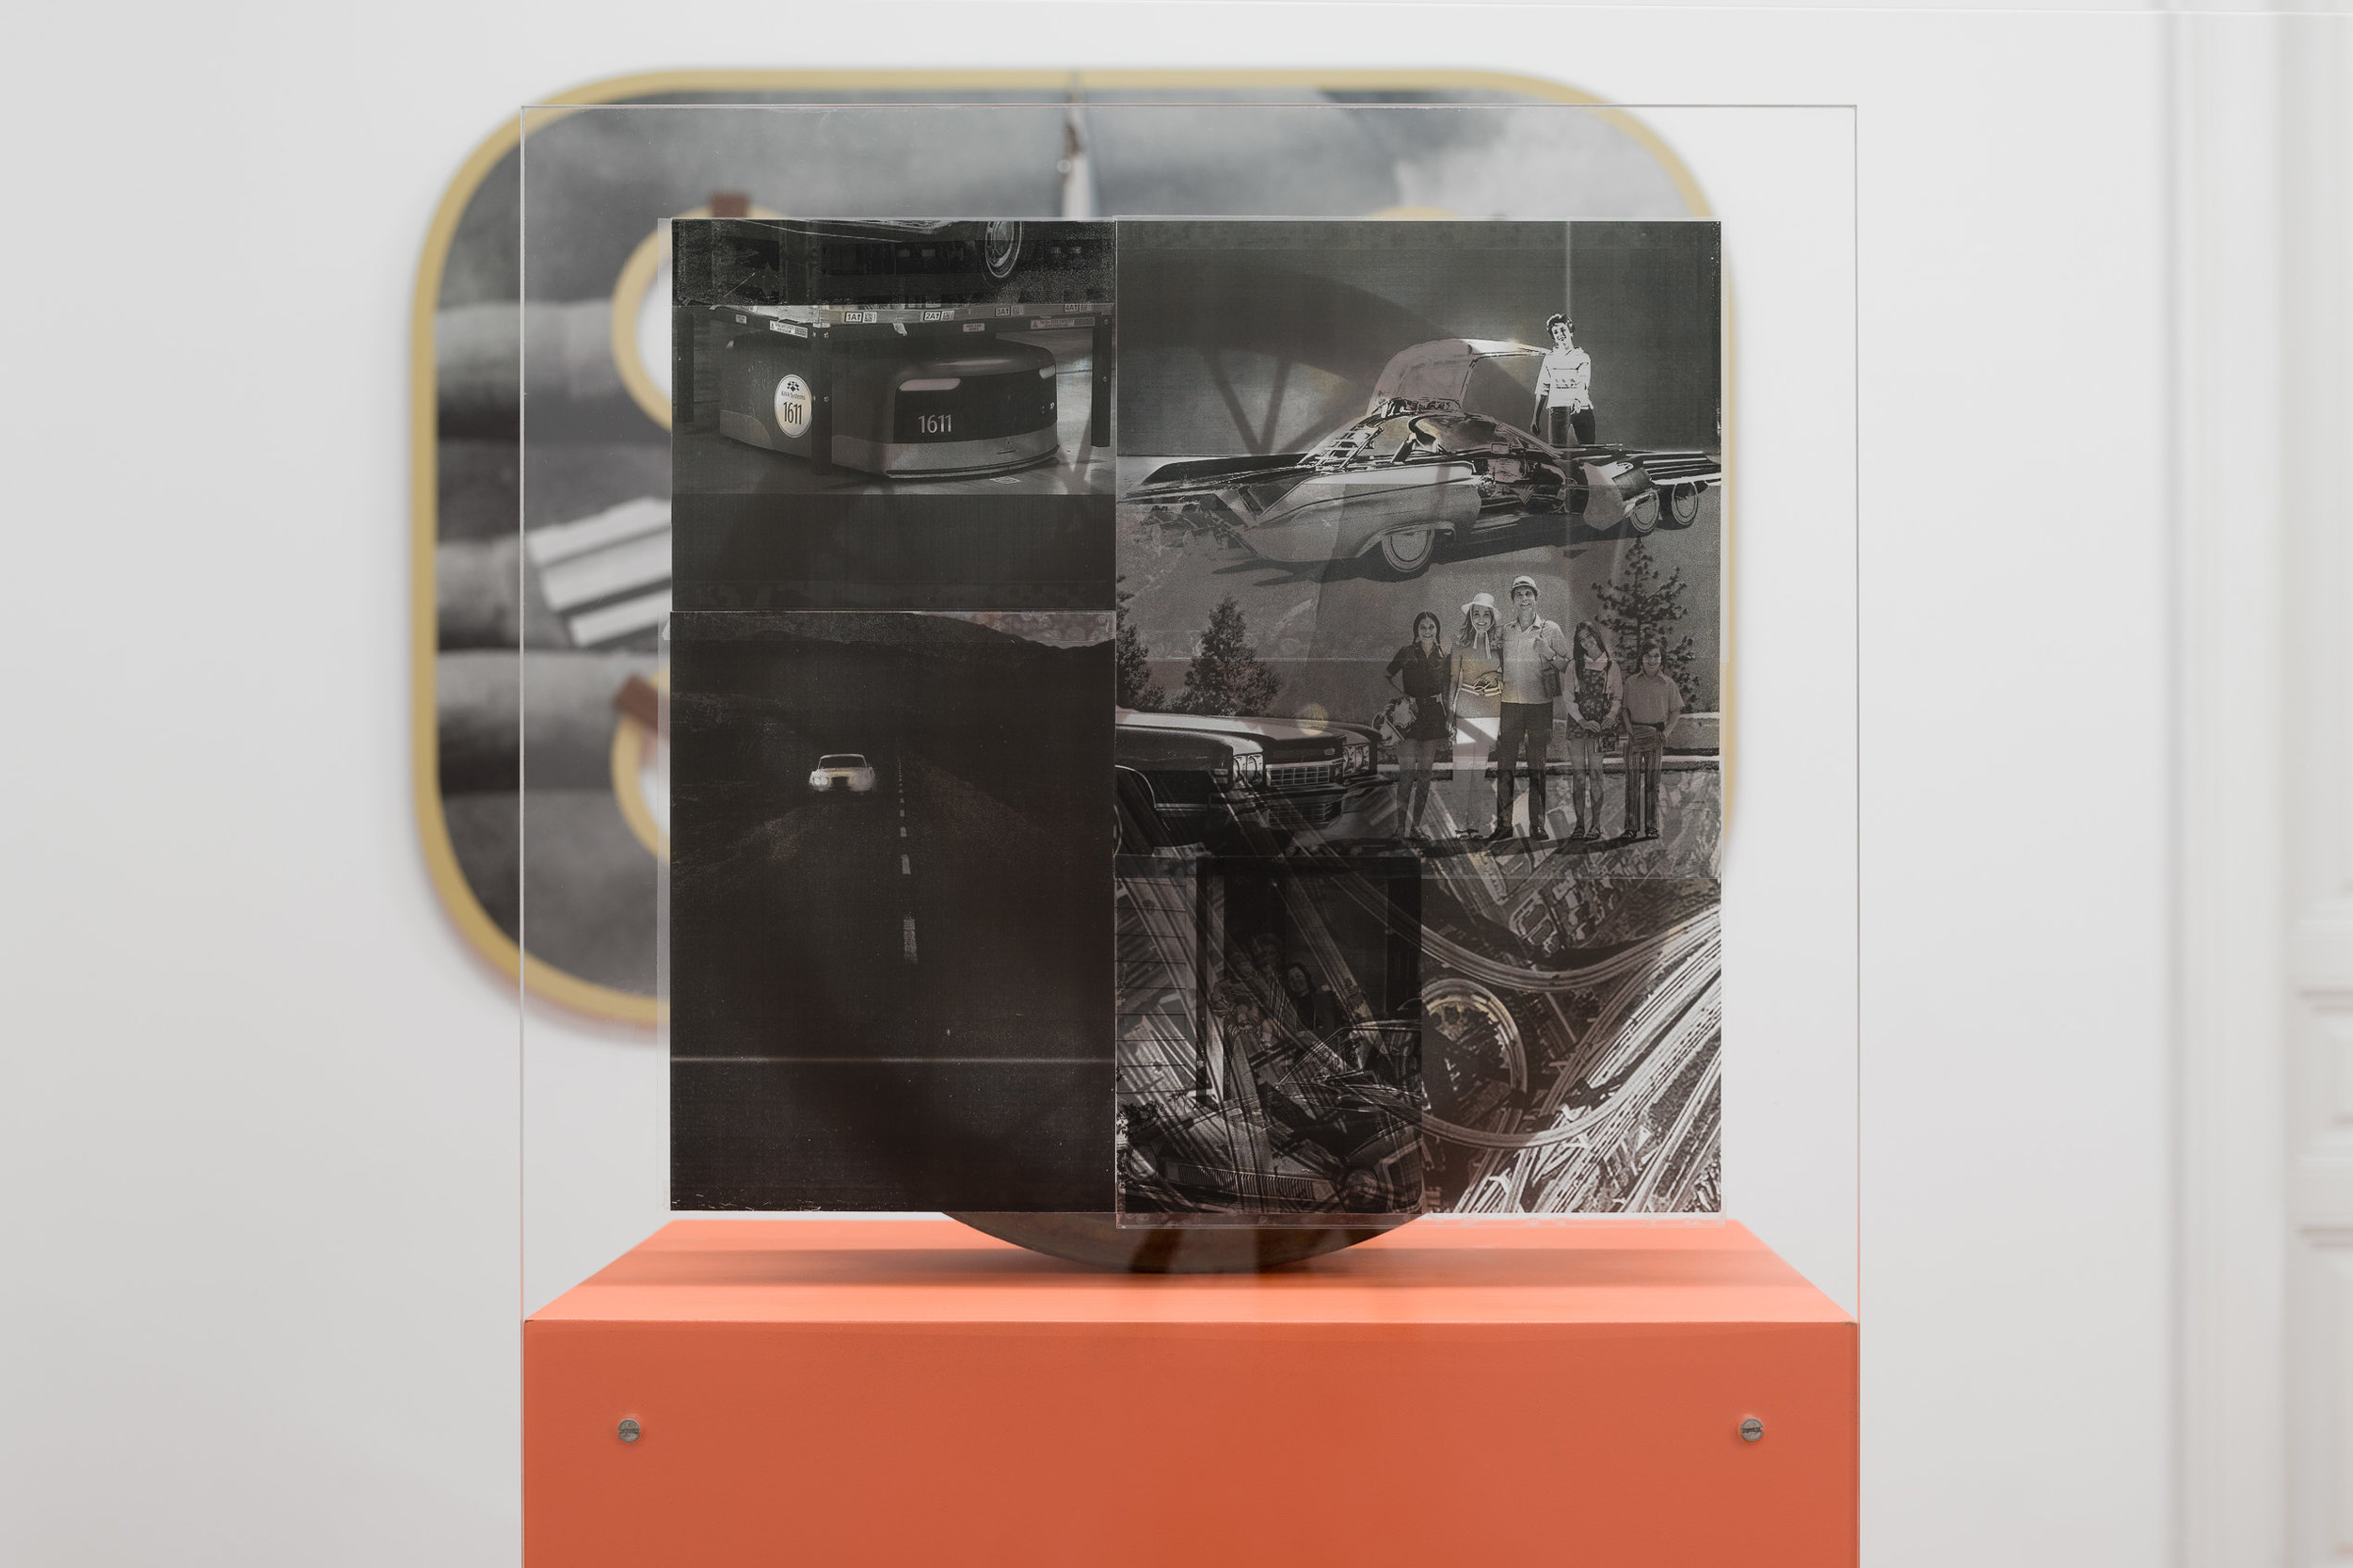  Alex Ito,  You Promised Catastrophe (Open Road),  2018, Ford Model-A wheel, wood, inkjet print on acetate, plexiglass, paint, 147 x 61 x 41 cm 